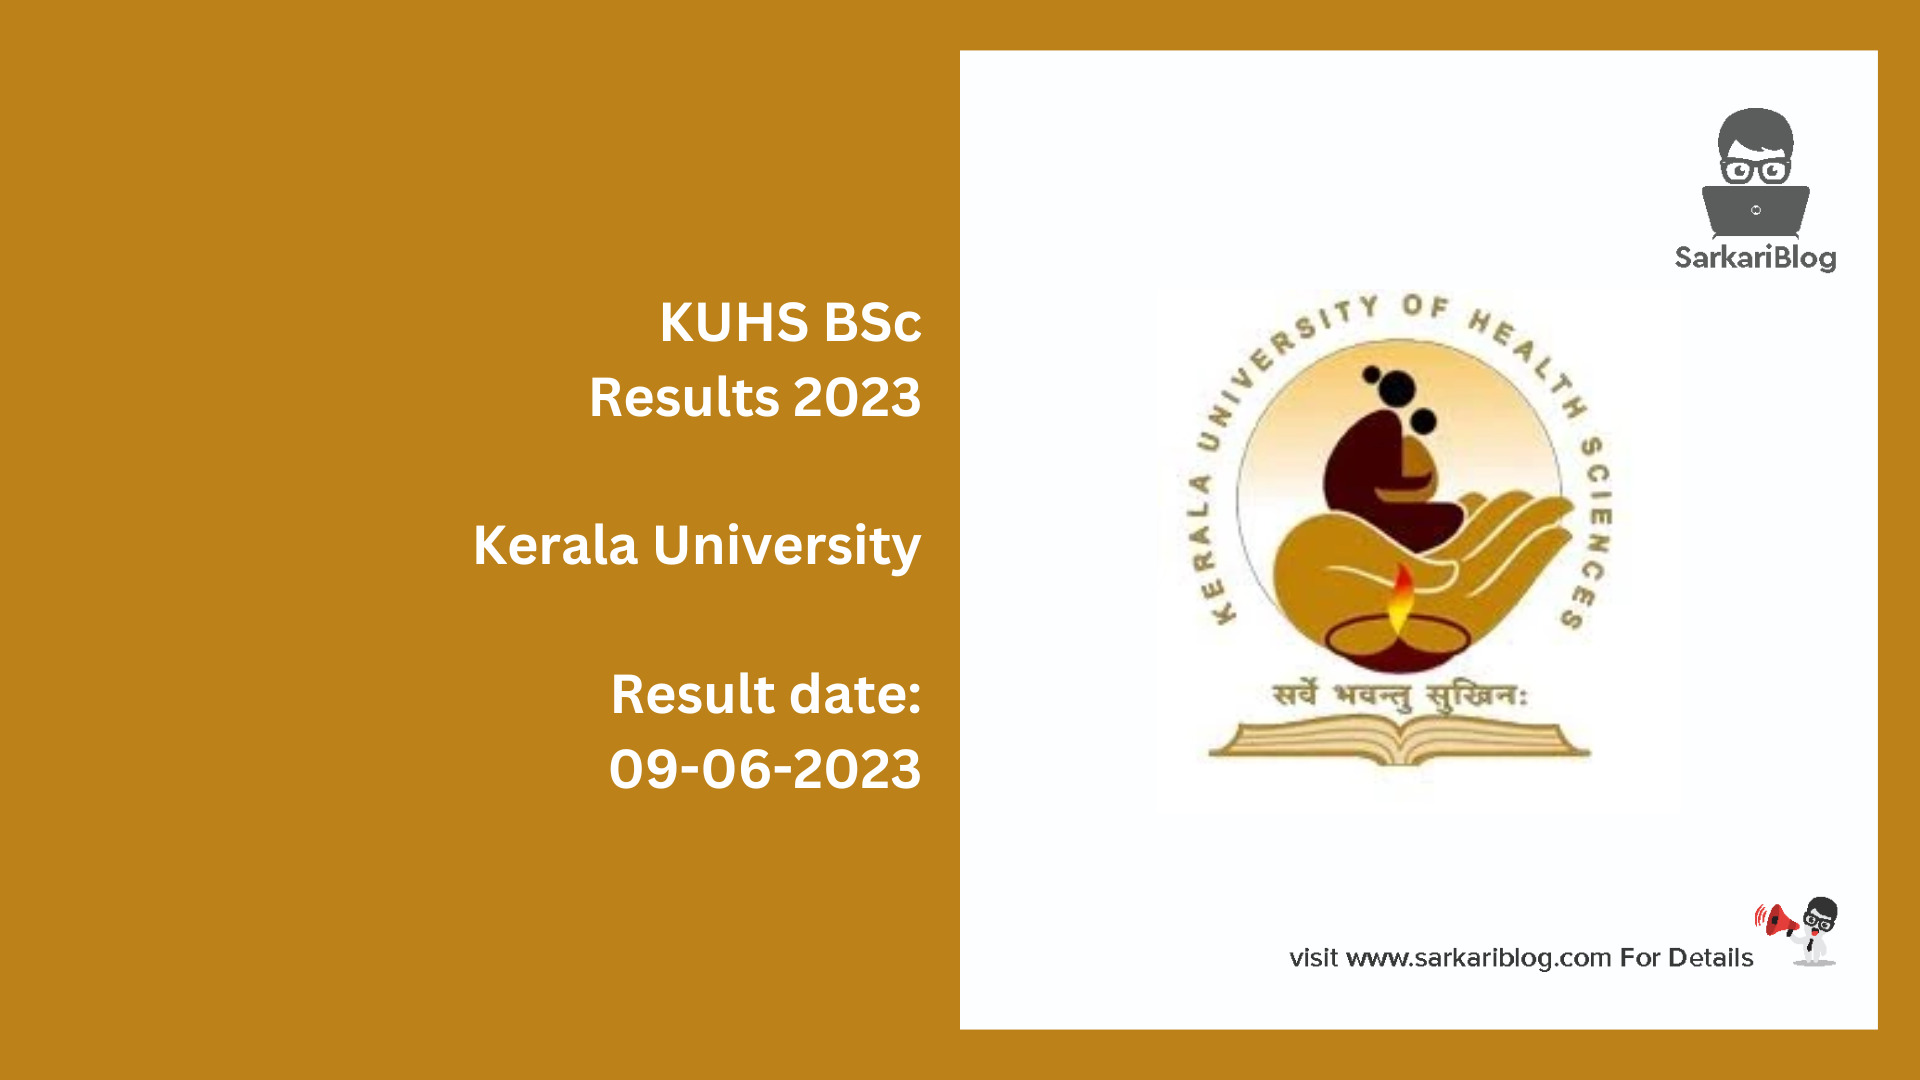 KUHS BSc Results 2023